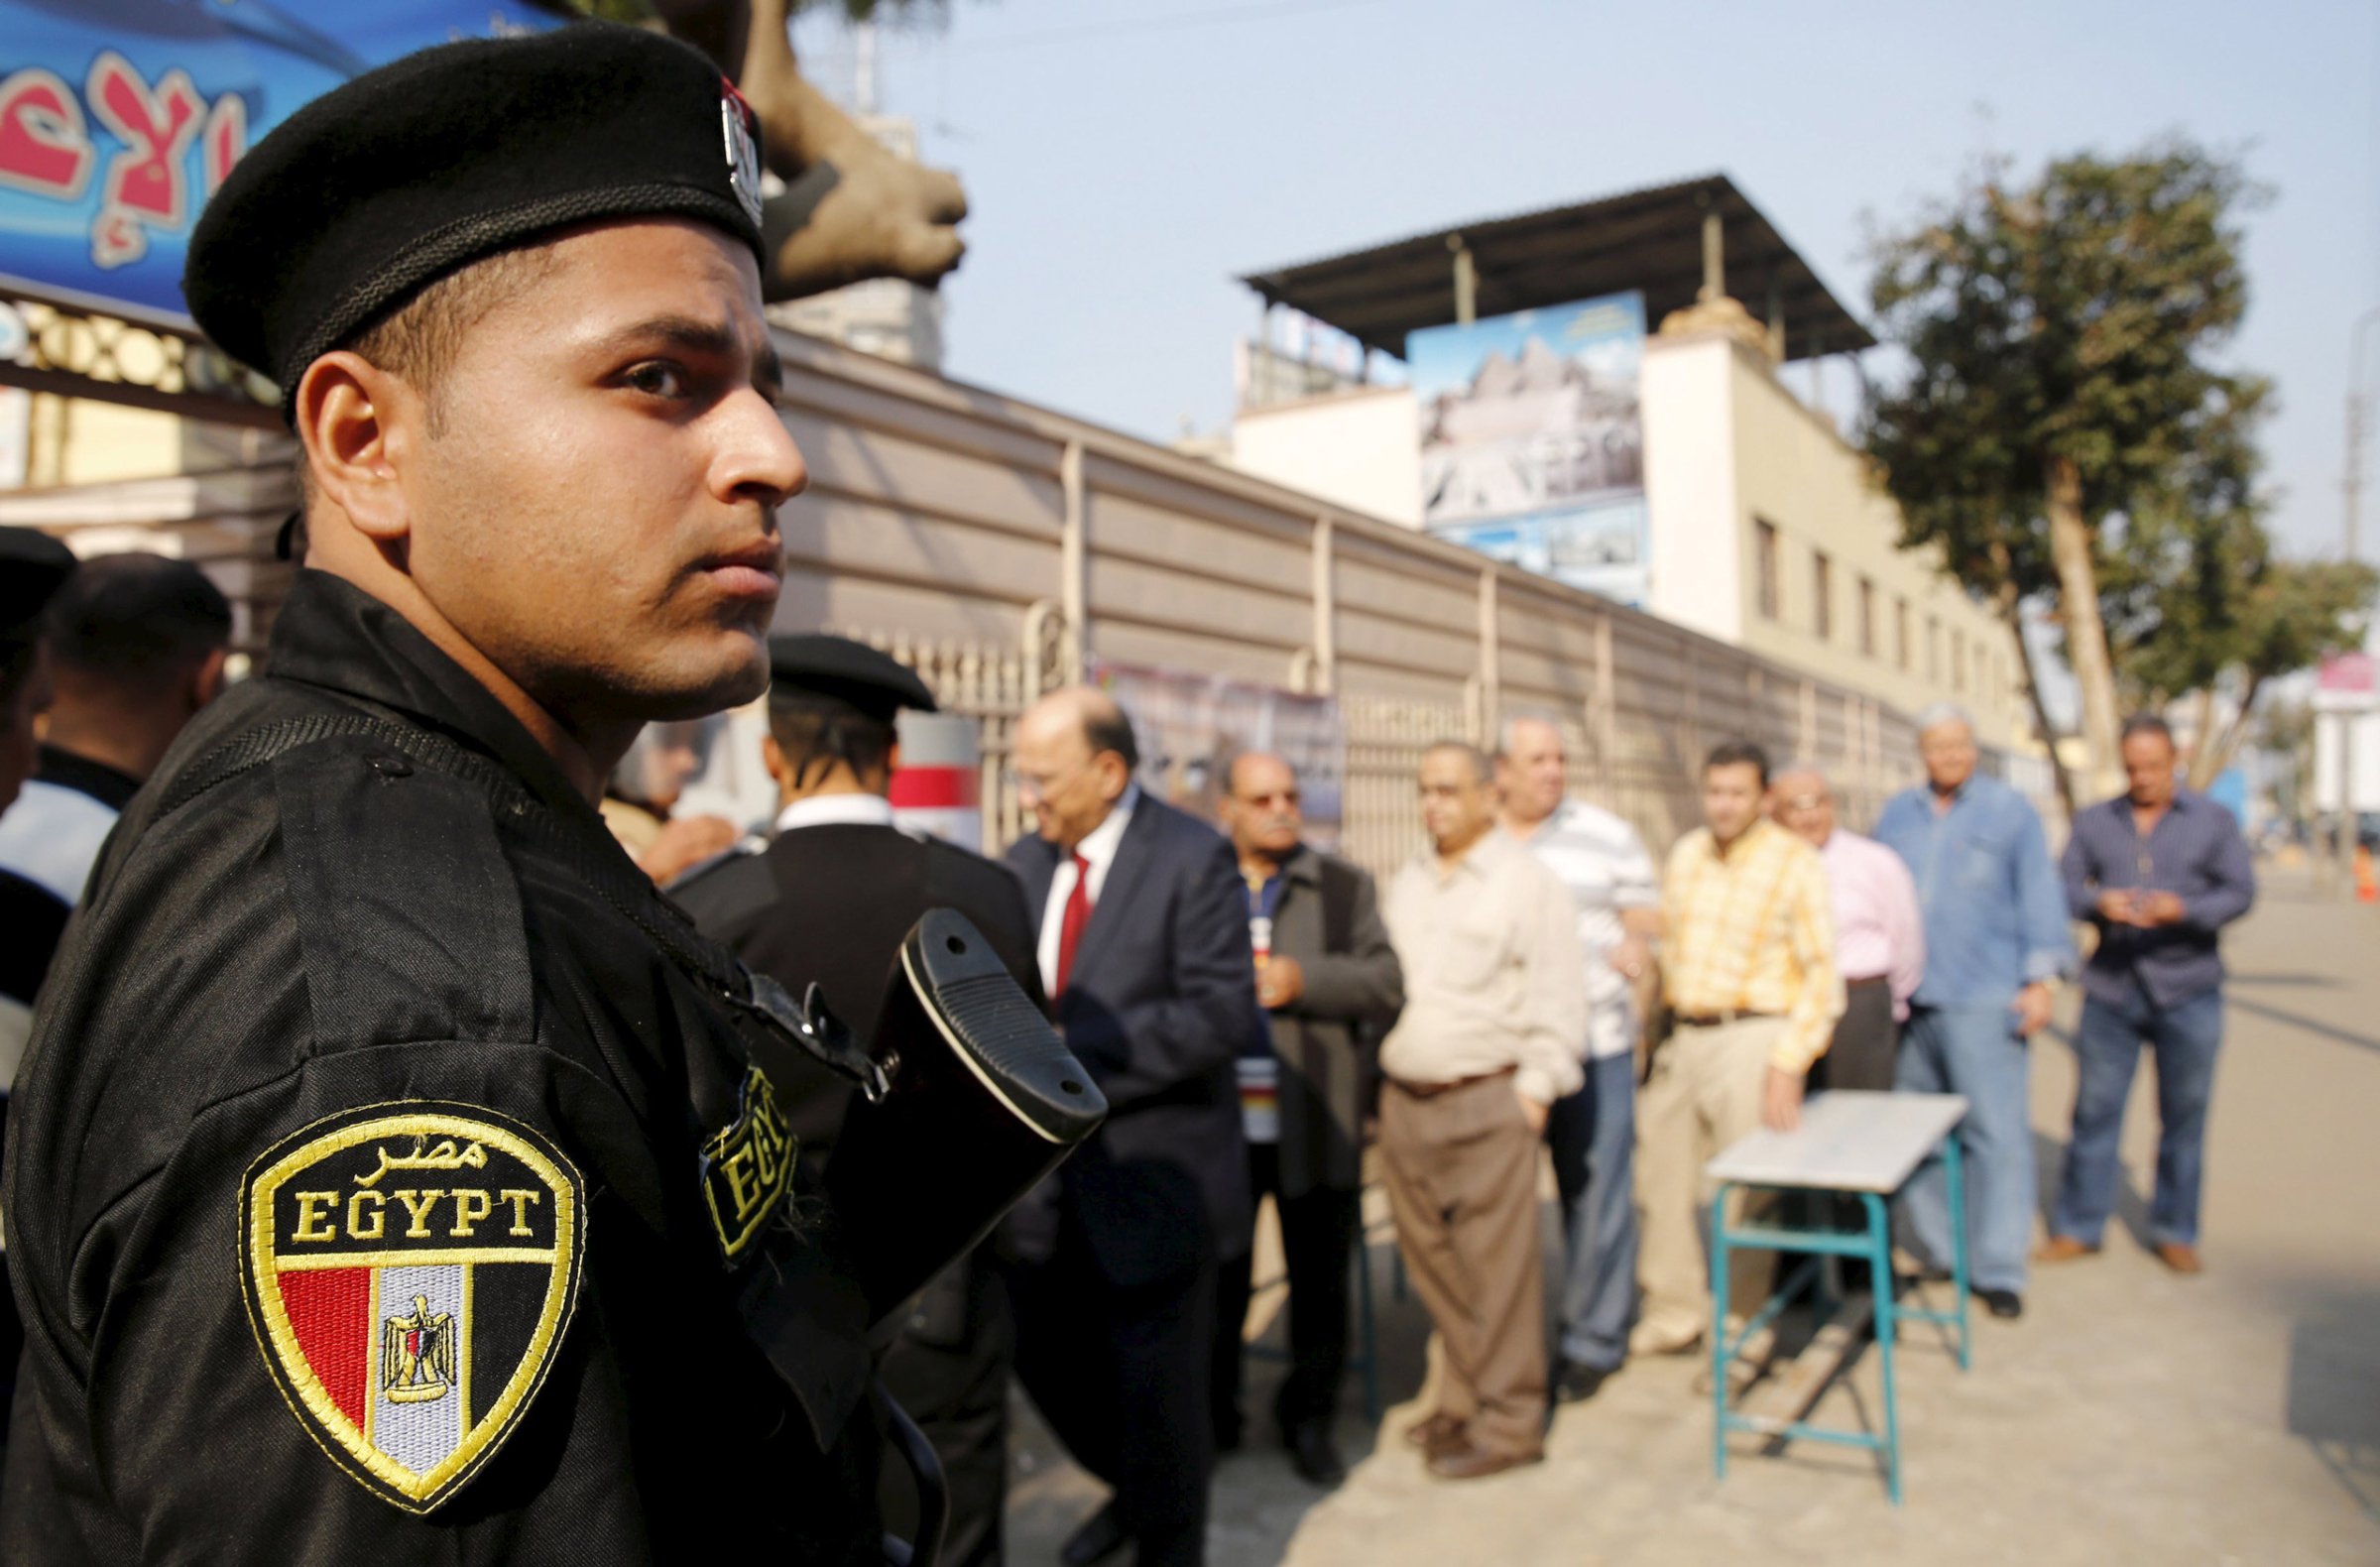 A policeman stands guard in front of people lining up to vote, outside a school being used as a polling station during the second round of parliament elections at Heliopolis in Cairo, Egypt